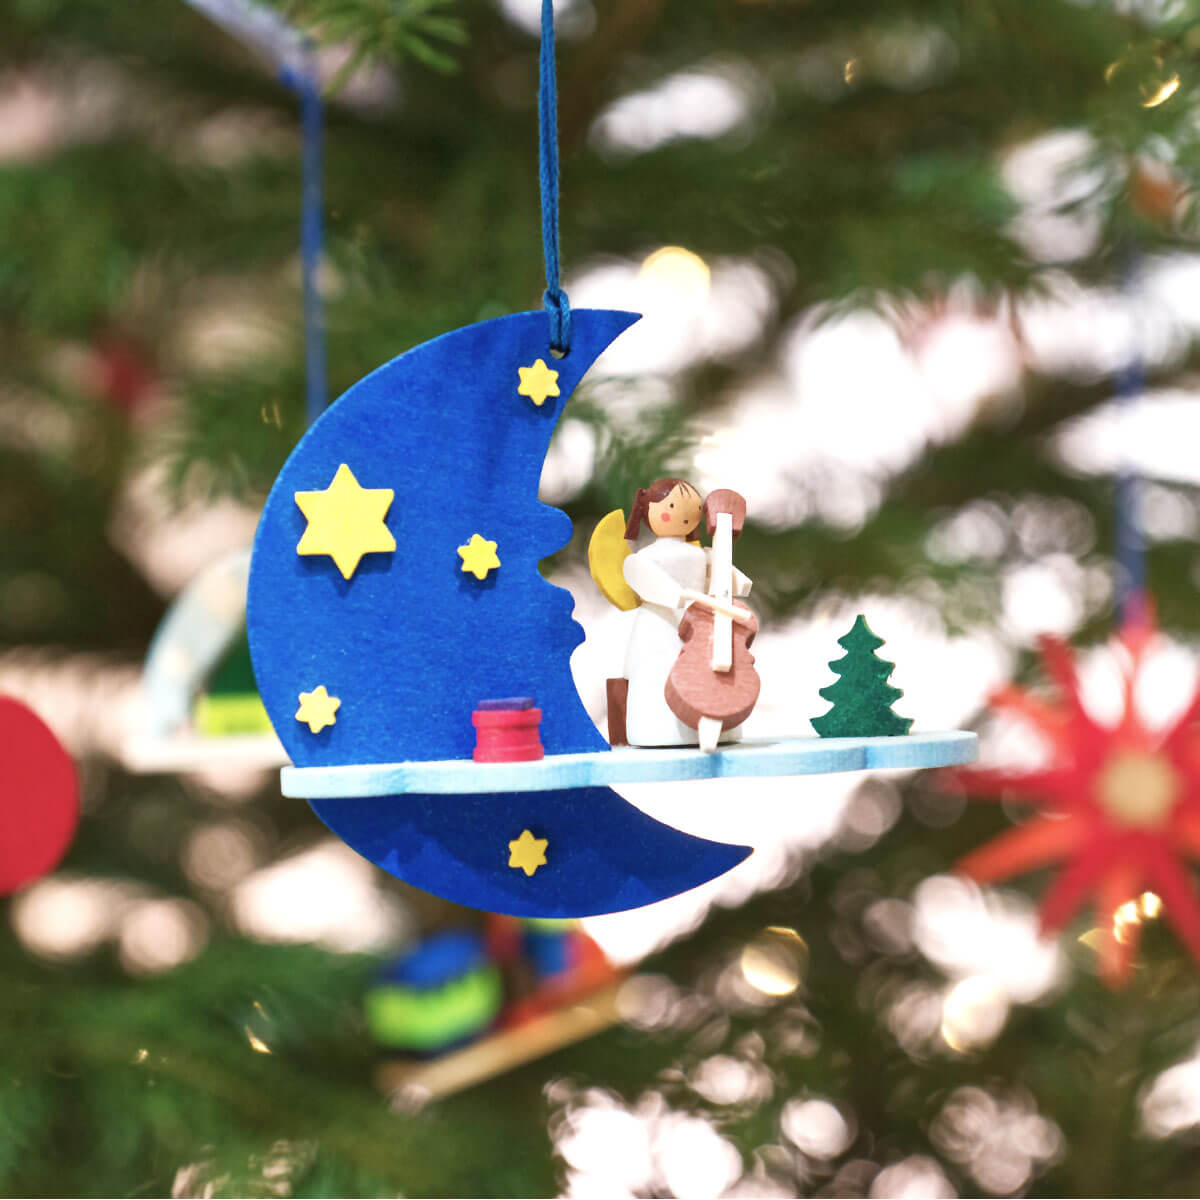 Moon & Cloud 'Angel' Ornament with sewing machine